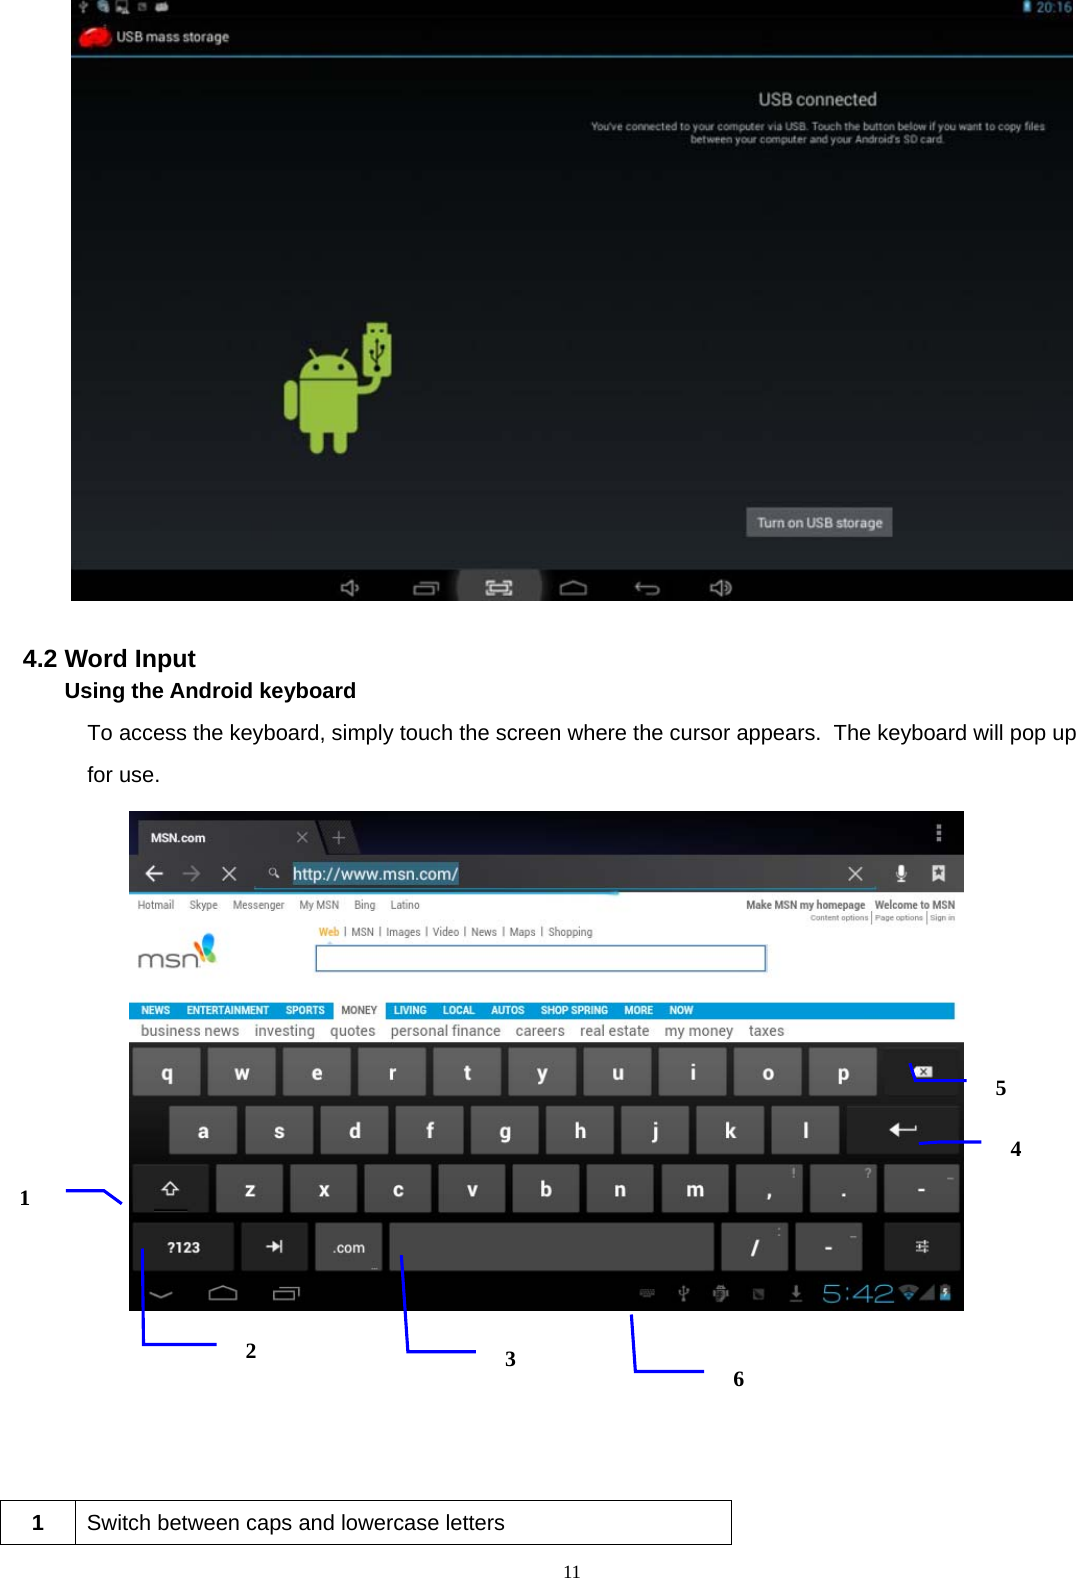  11  4.2 Word Input       Using the Android keyboard  To access the keyboard, simply touch the screen where the cursor appears.  The keyboard will pop up  for use.              1  Switch between caps and lowercase letters 1 2 35 4 6 